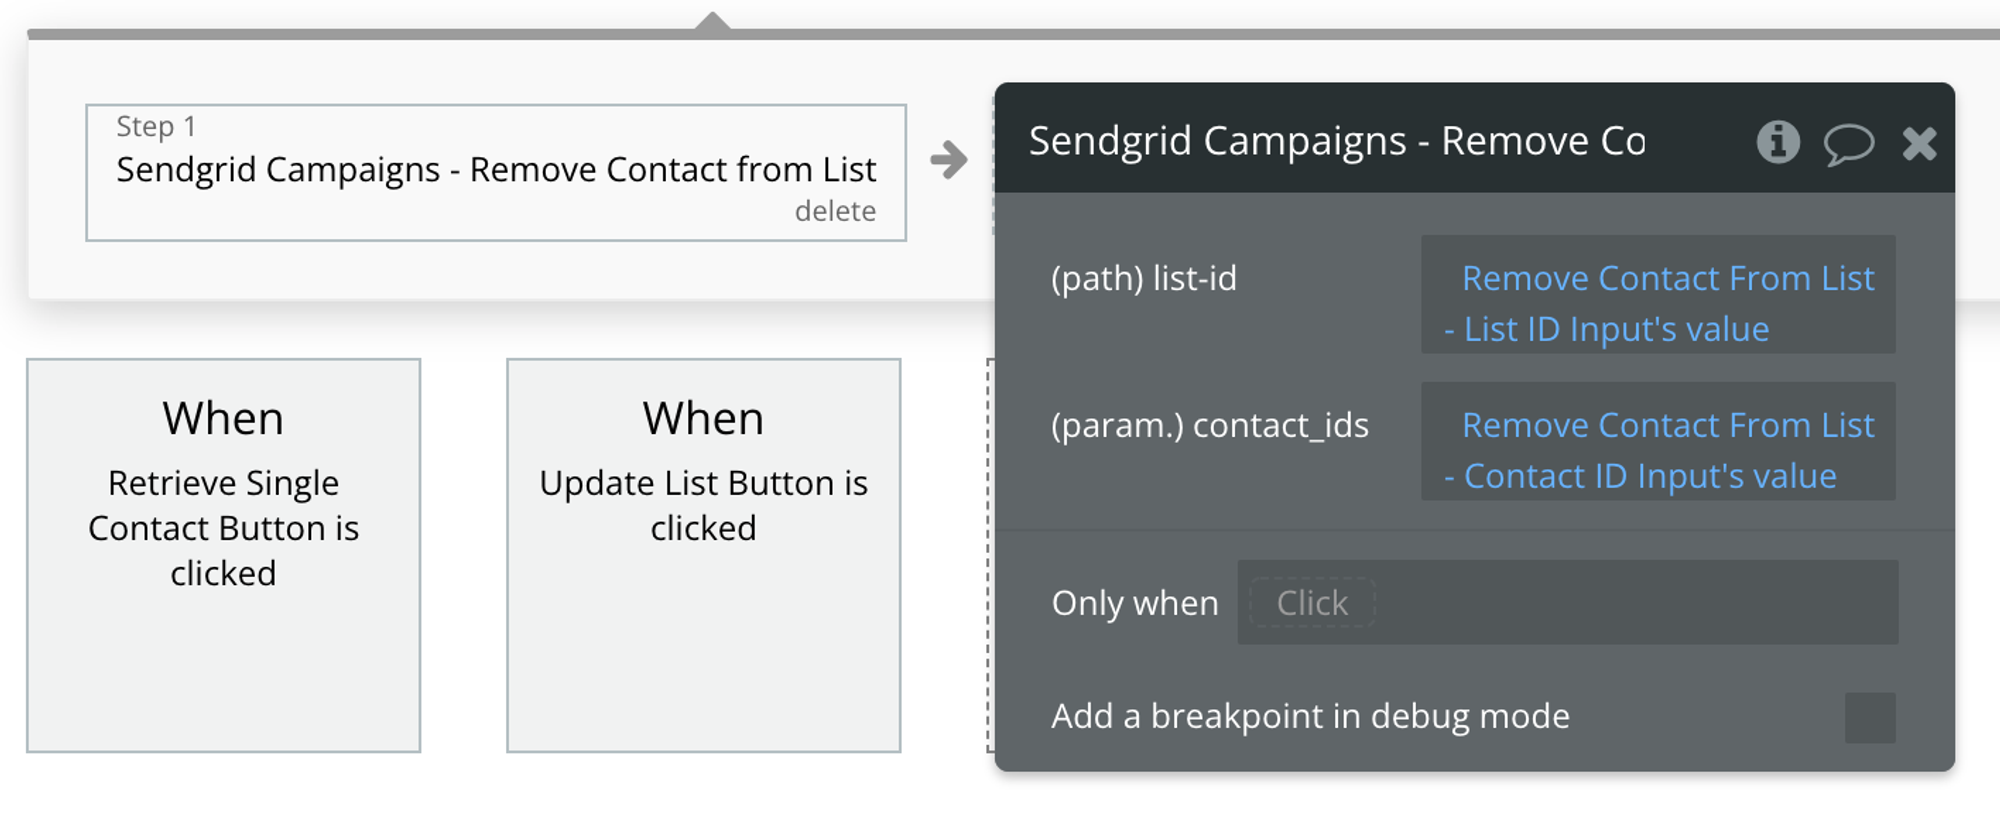 Select Sendgrid Campaigns - Remove Contact from List from the list of Plugin actions